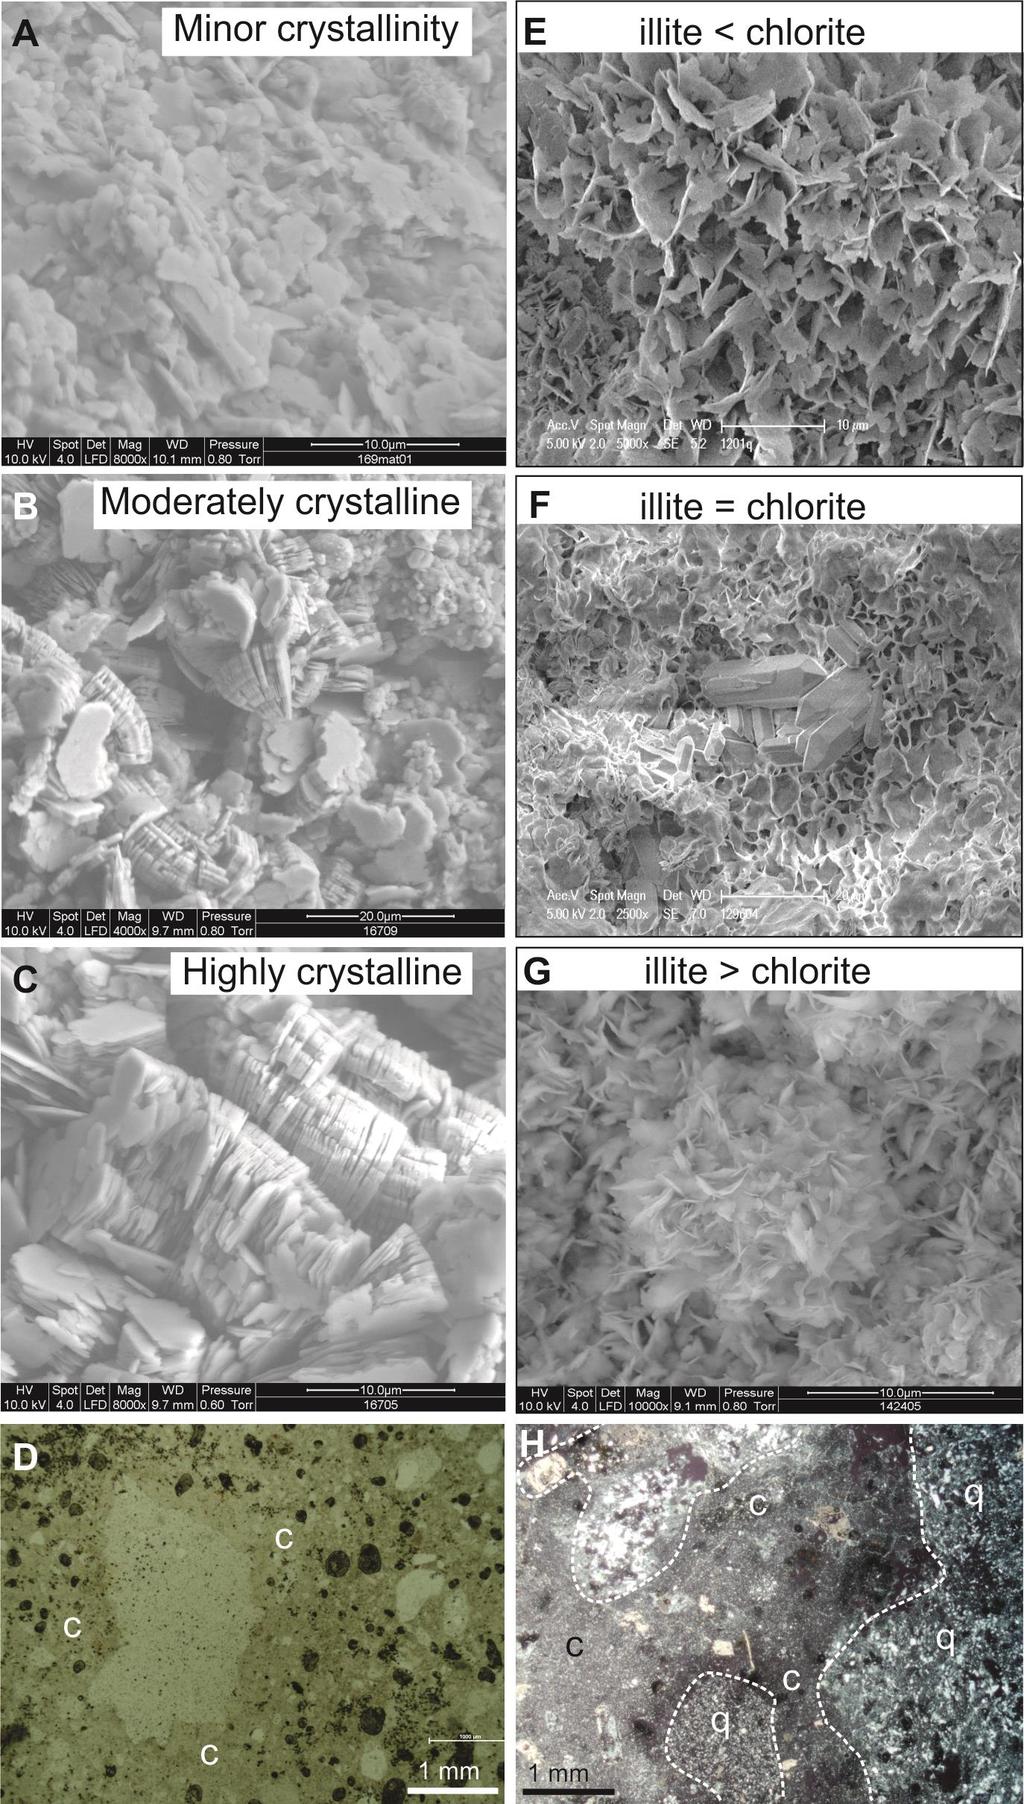 Figure 3: Clay morphologies. (A-C) Kaolin clay in a minor, moderate and highly crystalline form reveals different morphologies for each degree of crystallisation.